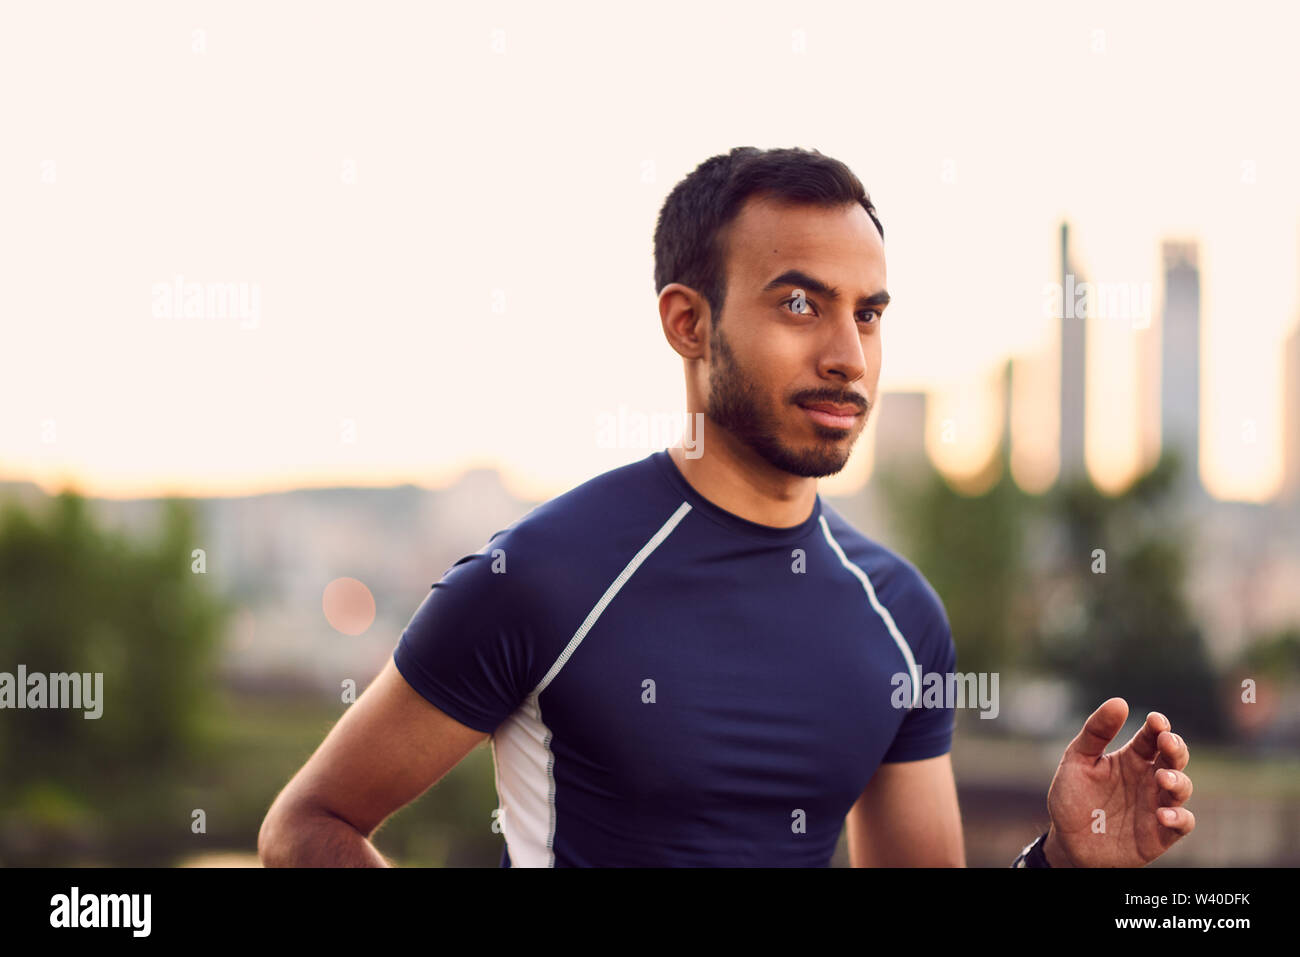 Portrait of active millenial man jogging at dusk with an urban cityscape and sunset in the background Stock Photo